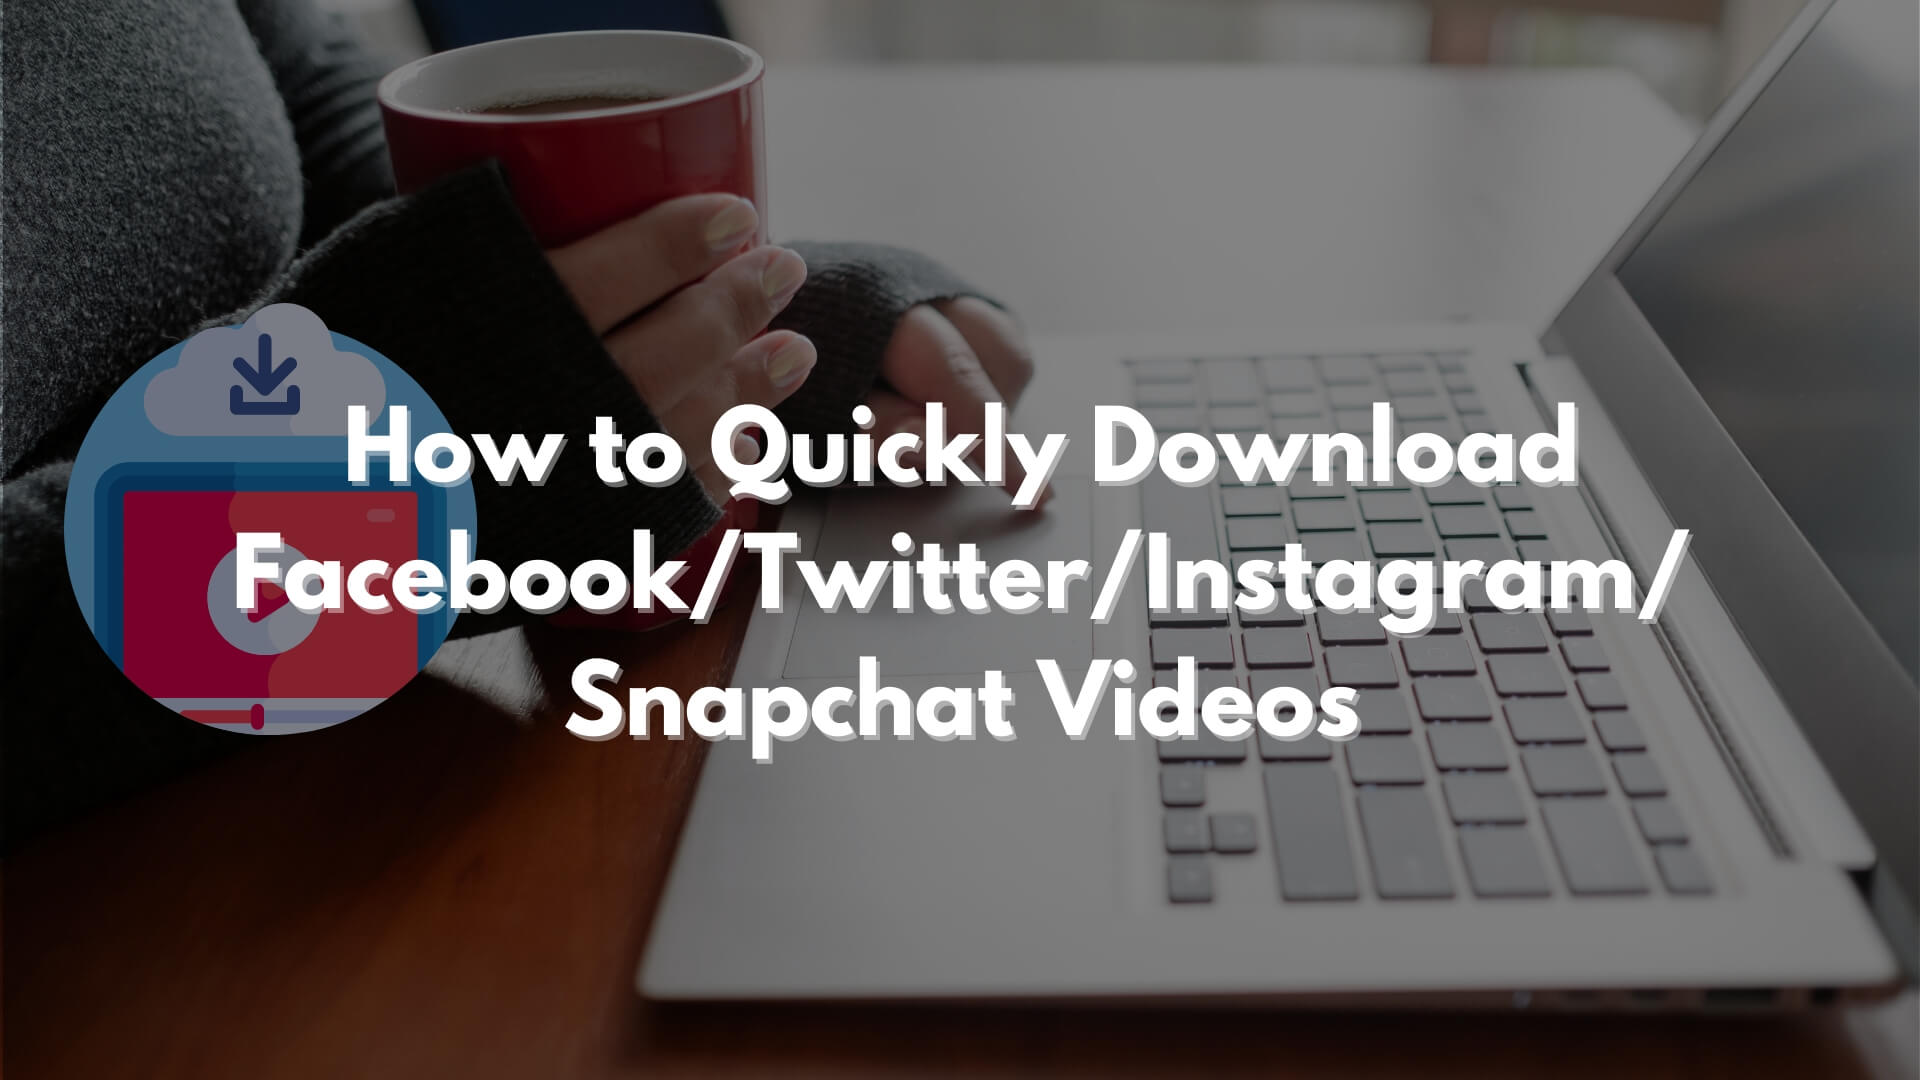 How To Quickly Download Facebook Twitter Instagram Snapchat Videos